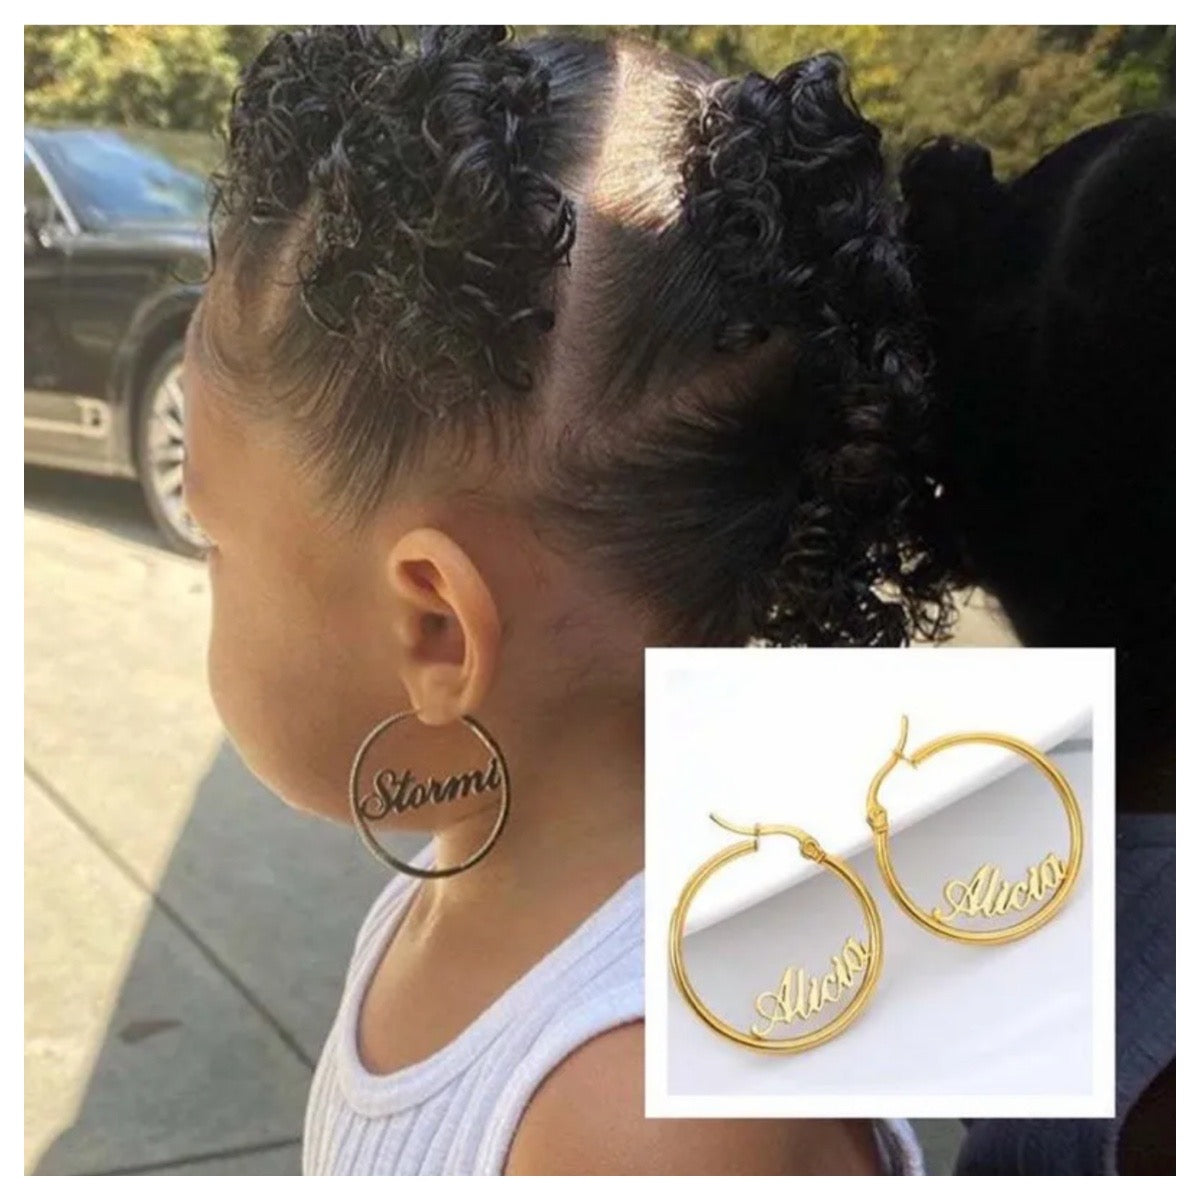 Aferando Gold Plated Chain Linked Medium Size Hoop Earrings for Girls